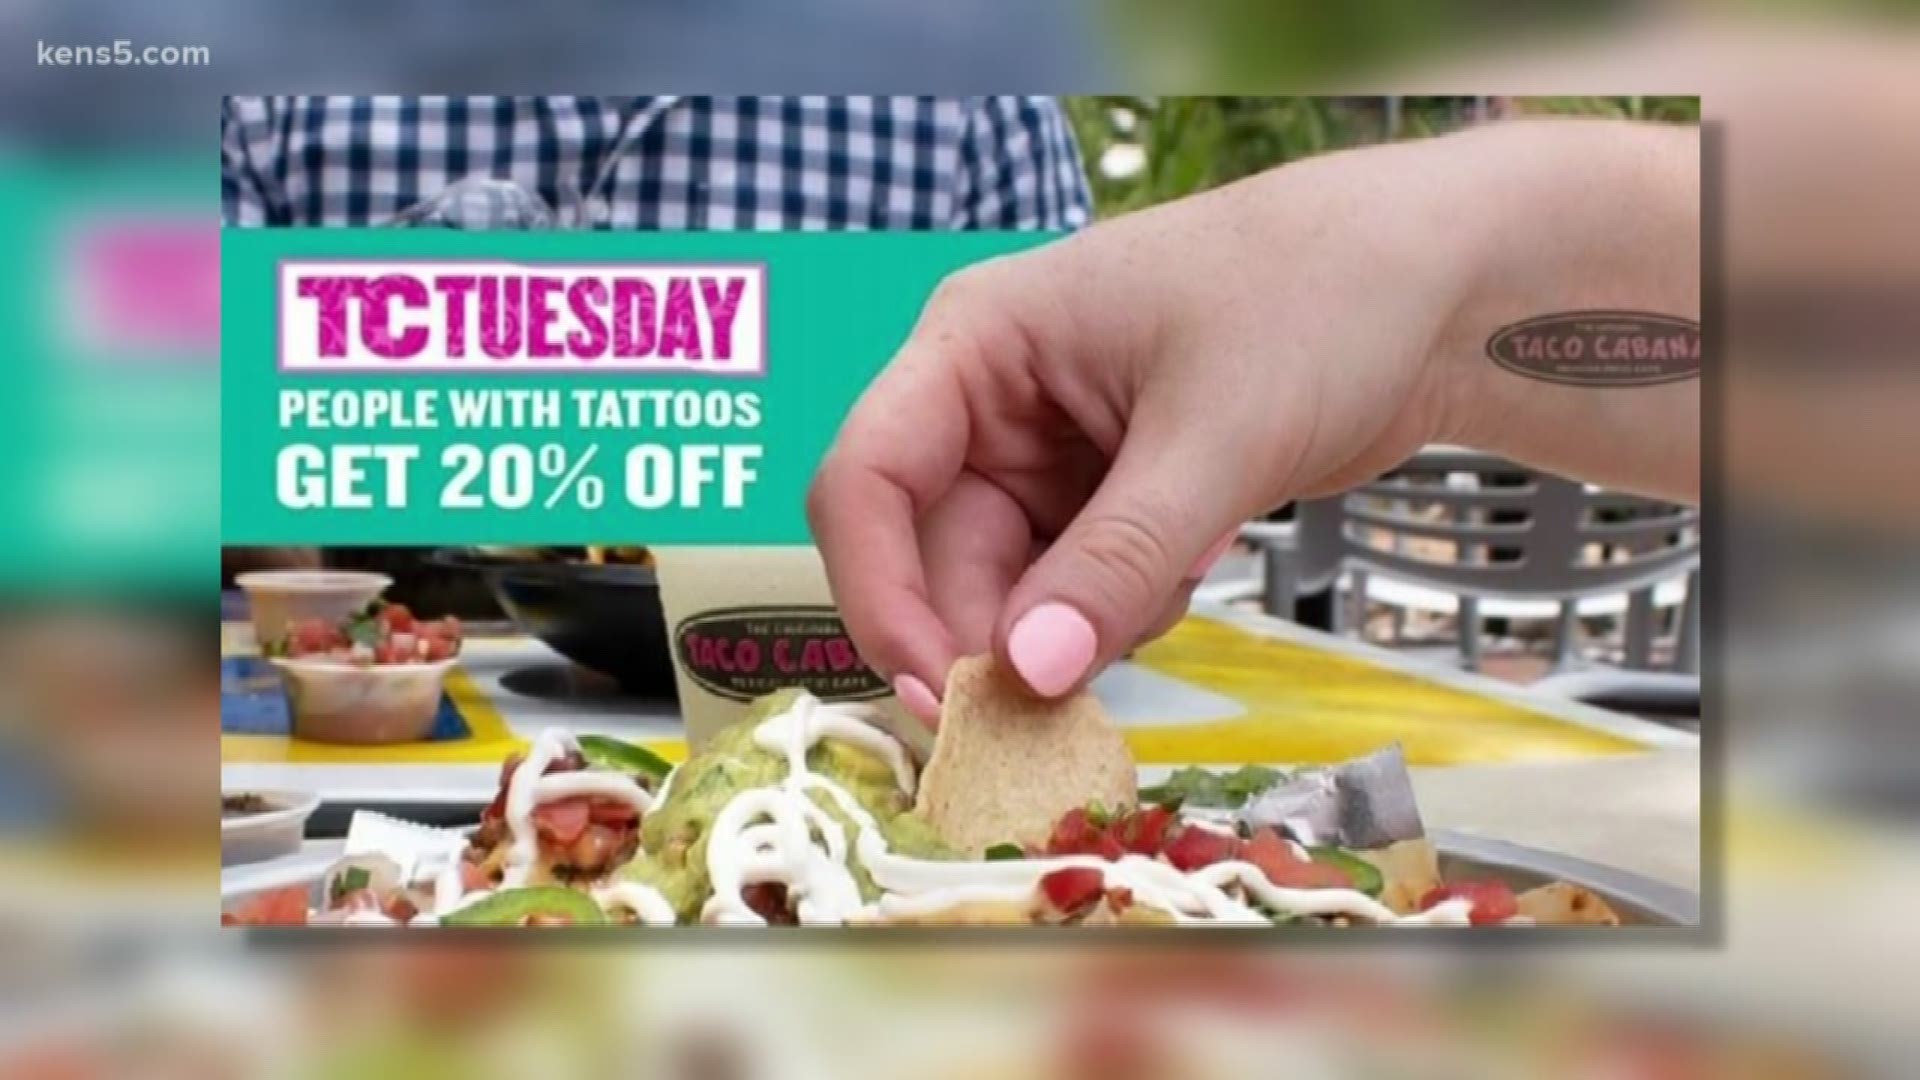 If you have a tattoo, you can get 20 percent off your order at Taco Cabana on Tuesday. It's all in celebration of National Tattoo Day.